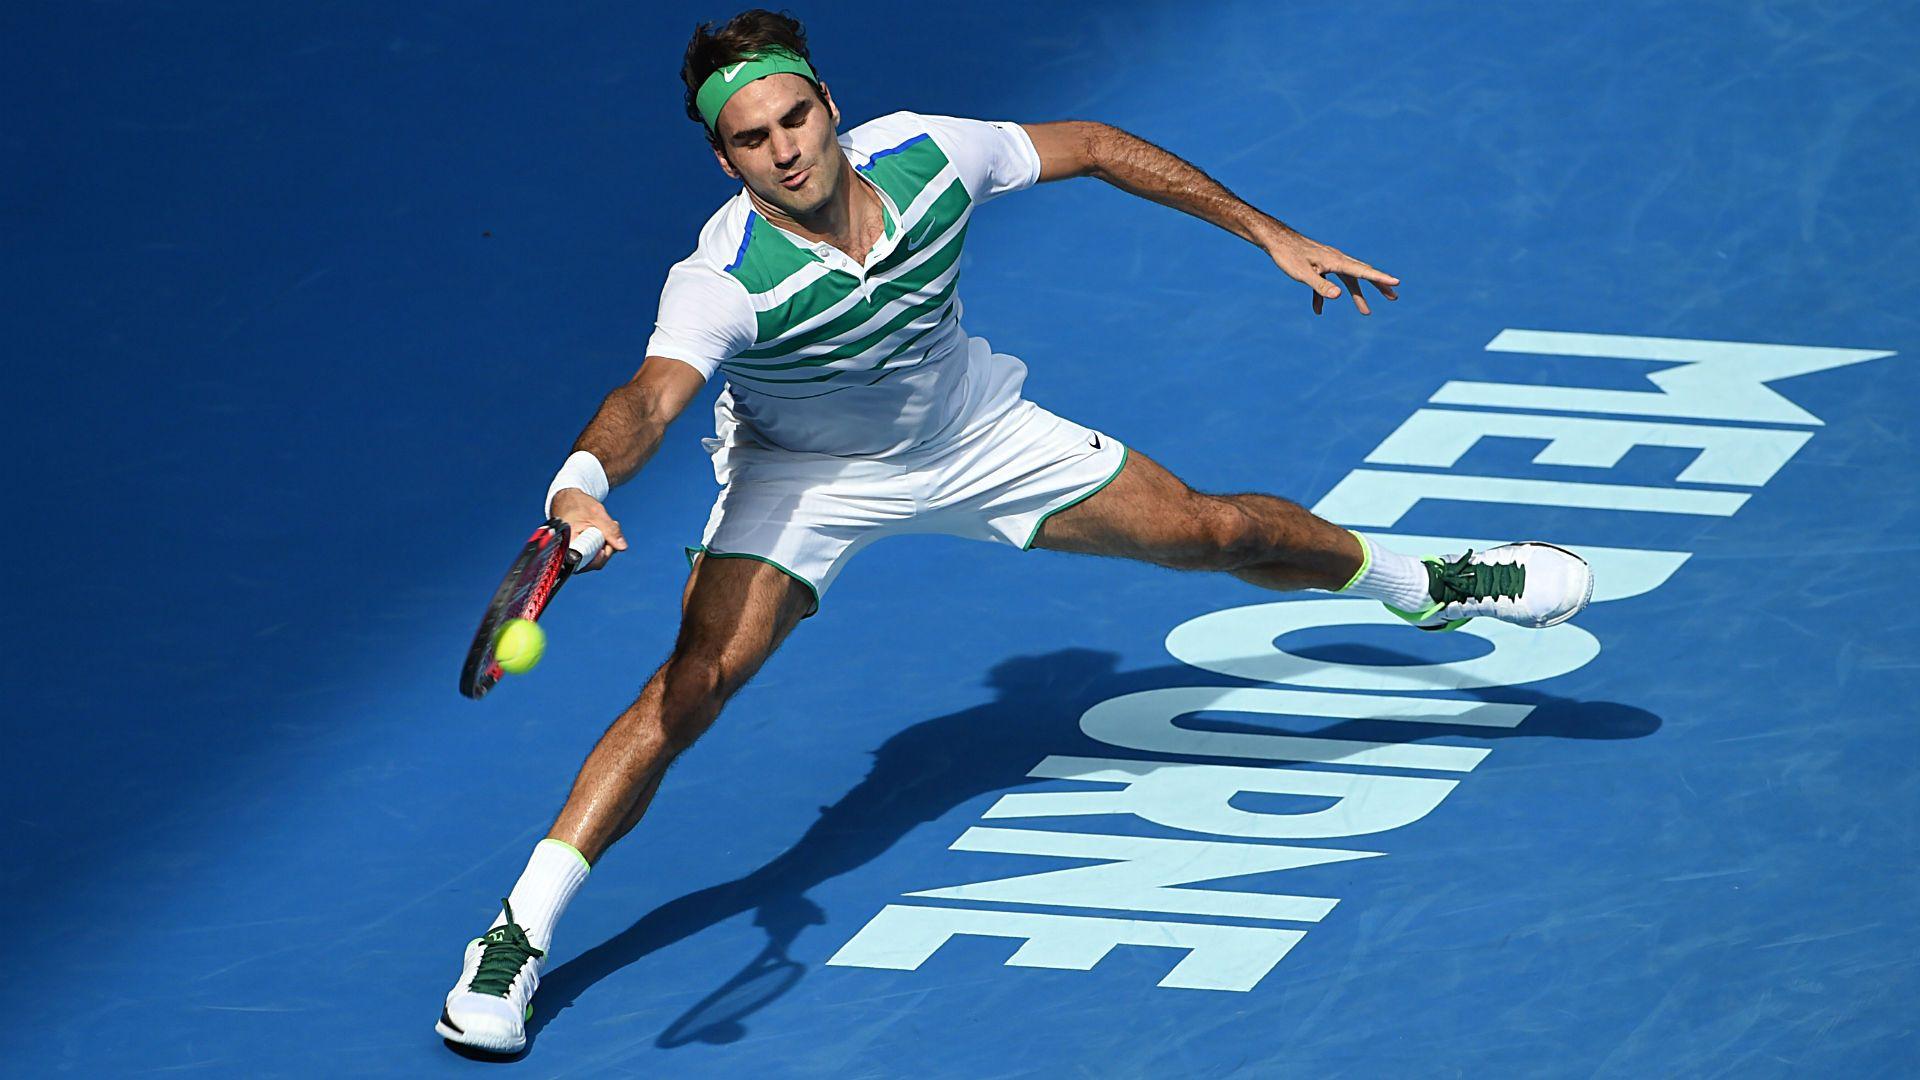 Australian Open 2016: Roger Federer outplays Tomas Berdych to